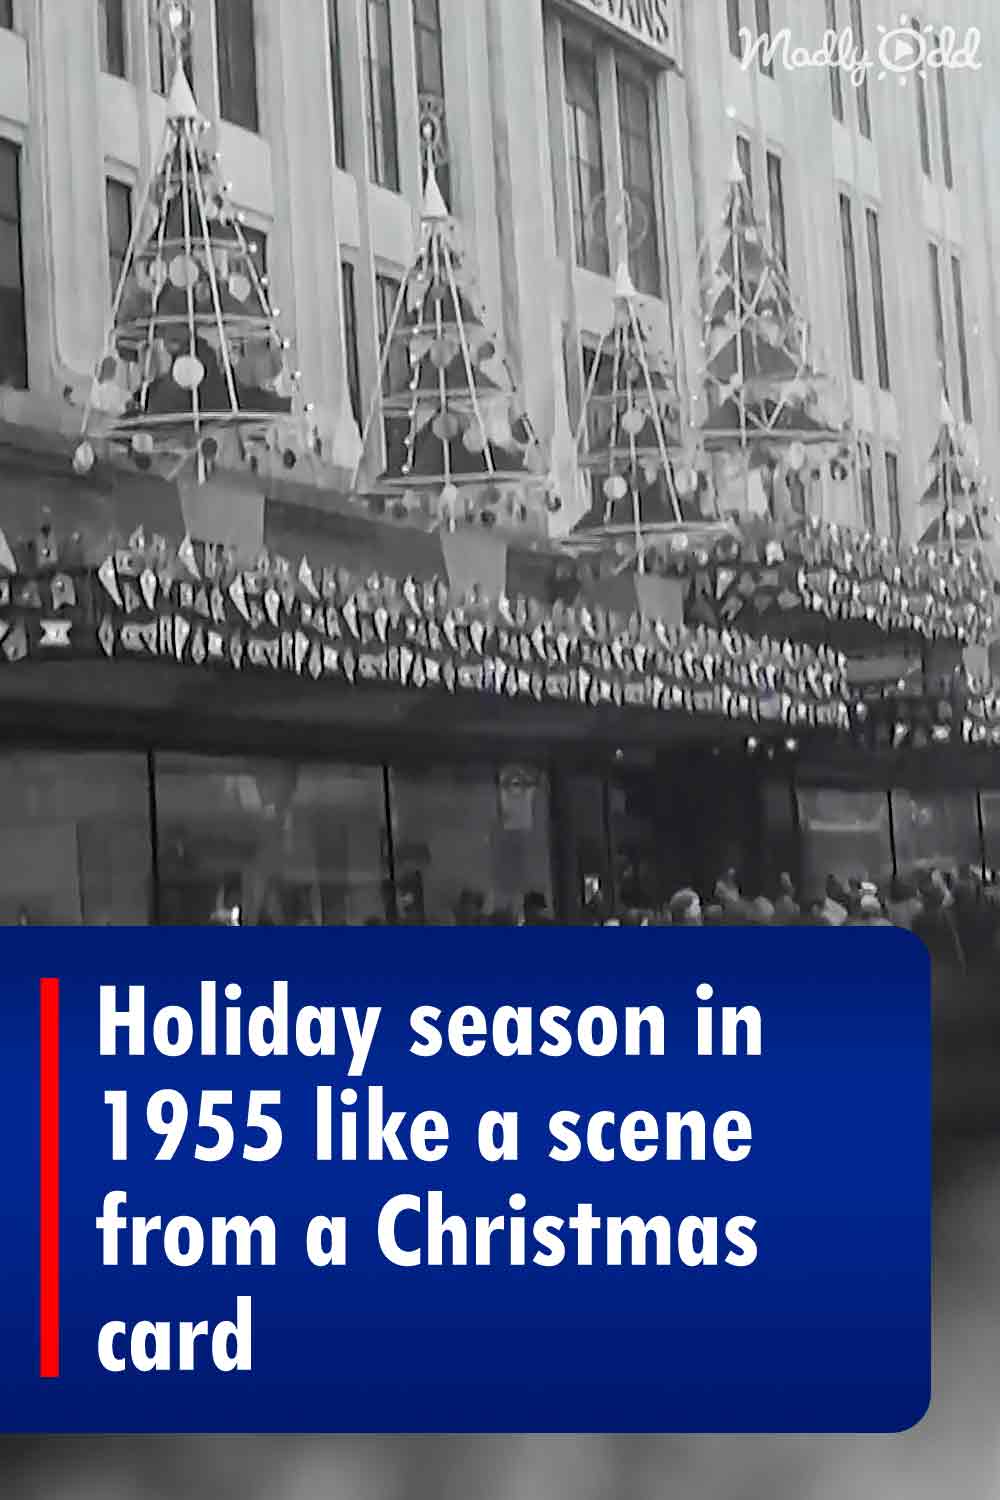 Holiday season in 1955 like a scene from a Christmas card